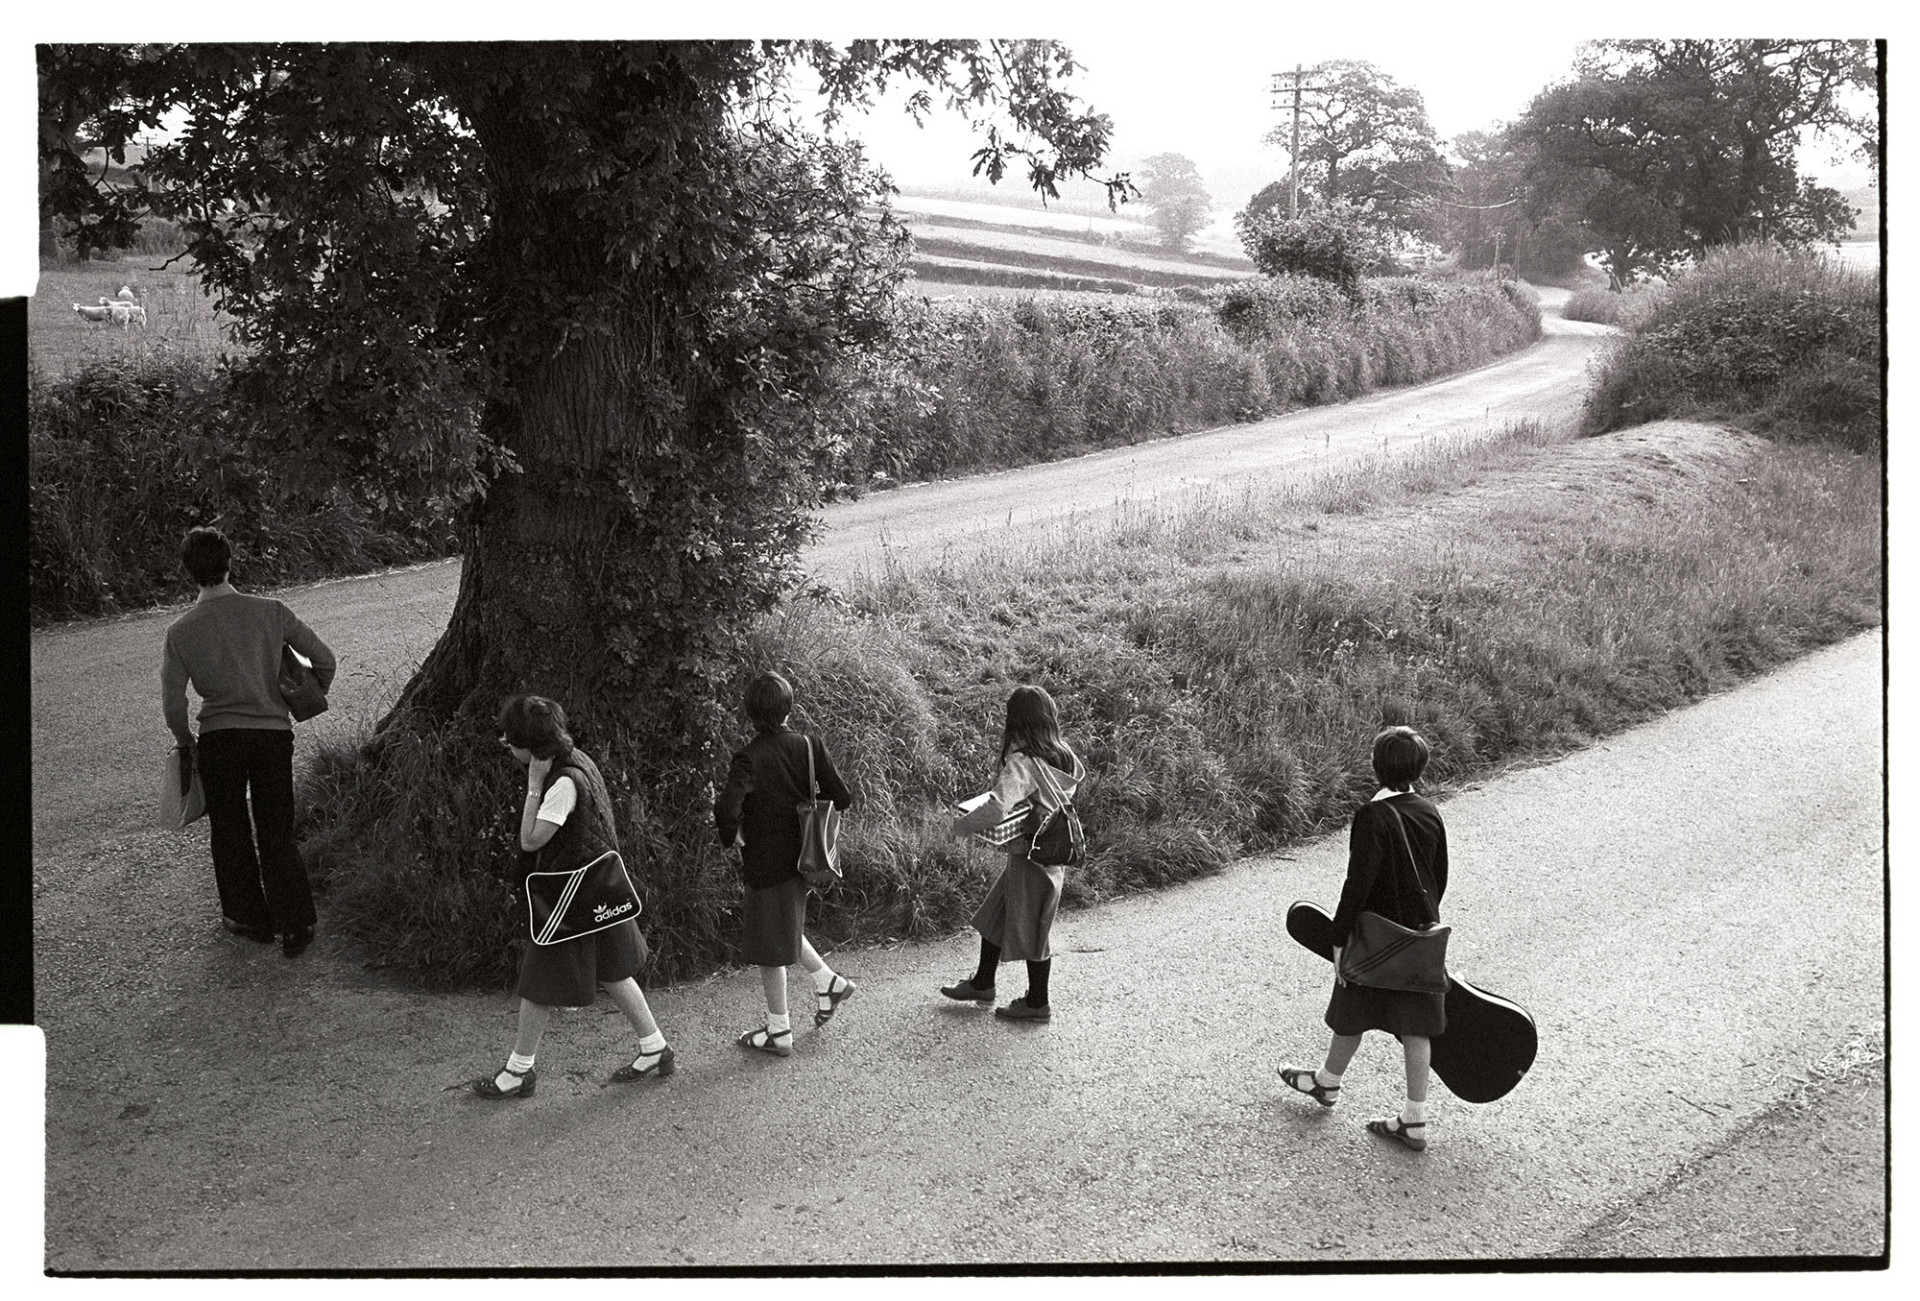 Schoolchildren about to catch school bus, bus arriving, girl with musical instrument. 
[Children waiting for the school bus by a tree at Lovistone Barton, Merton. One of them is carrying a guitar case.]